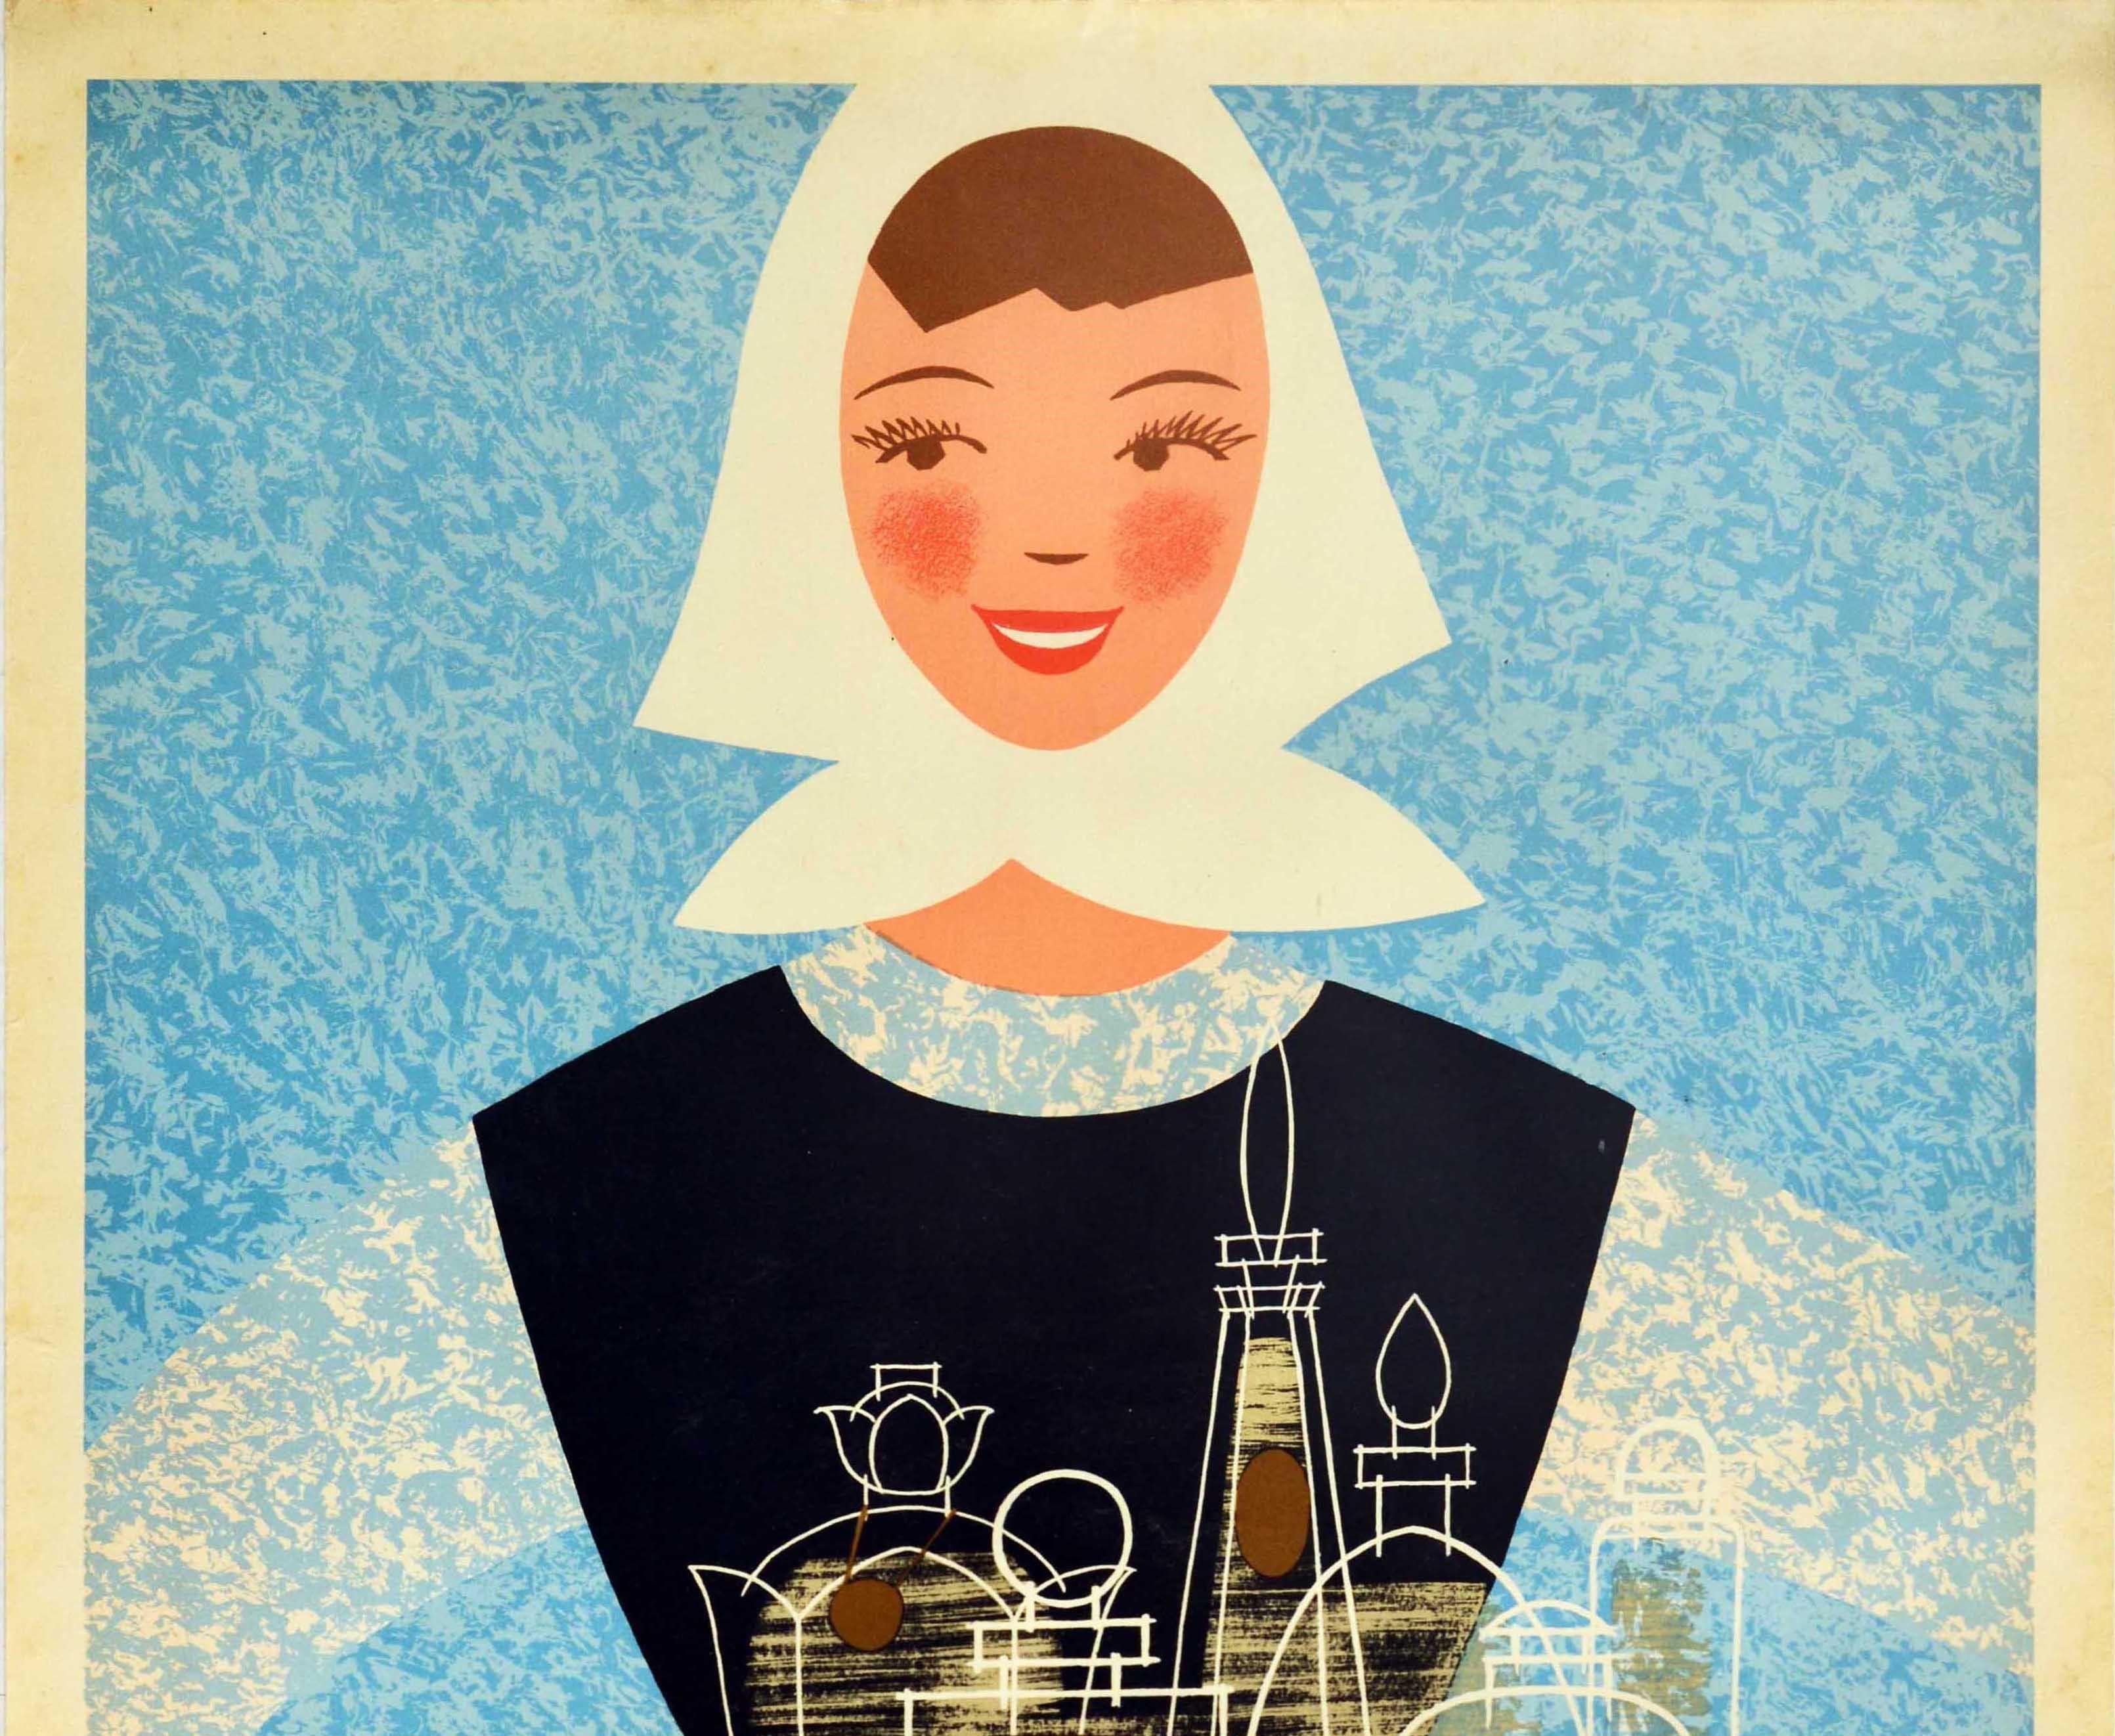 Original vintage advertising poster - Perfumery Sojuzchimexport Moscow - featuring a mid century modern design depicting a smiling young lady dressed in a blue and white top, brown skirt and white headscarf, holding a cloth with glass jars of